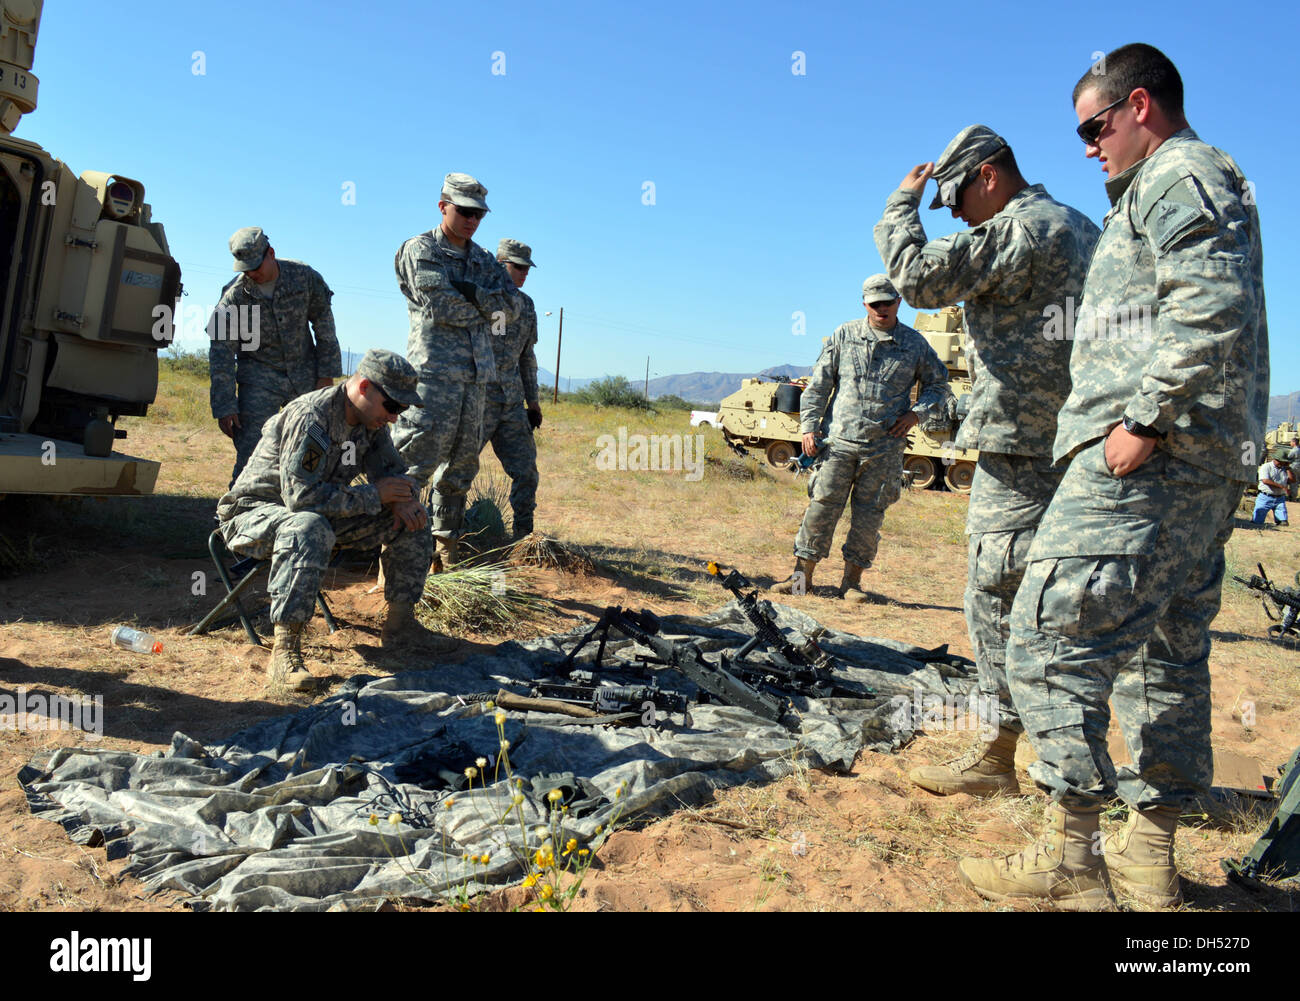 Sgt. Michael Cronin, a squad leader in Alpha Company, 1st Battalion, 6th Infantry Regiment, 2nd Brigade, 1st Armored Division, briefs Soldiers on assembly of various weapons at Fort Bliss, Texas, Oct. 25th, 2013. Soldiers at Network Integration Evaluation Stock Photo